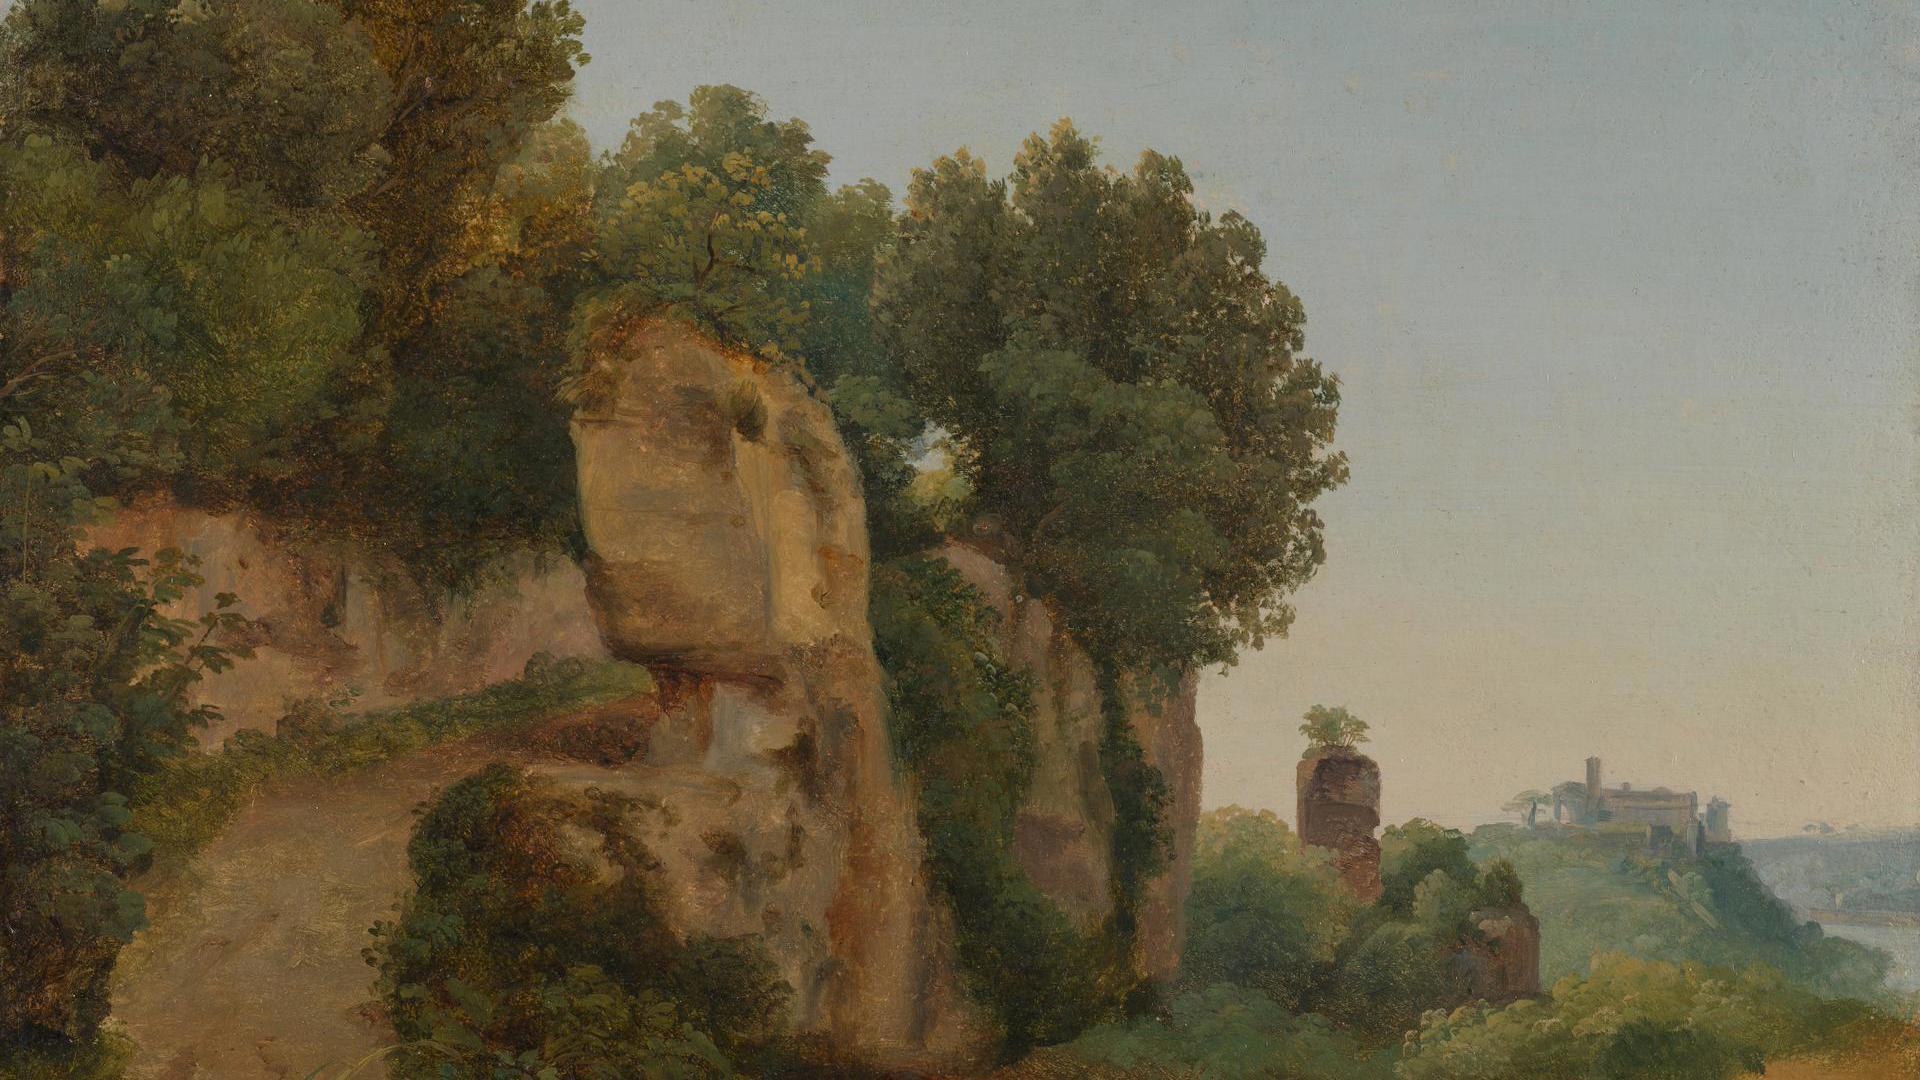 View of the Aventine Hill from the Palatine by Anton Sminck van Pitloo